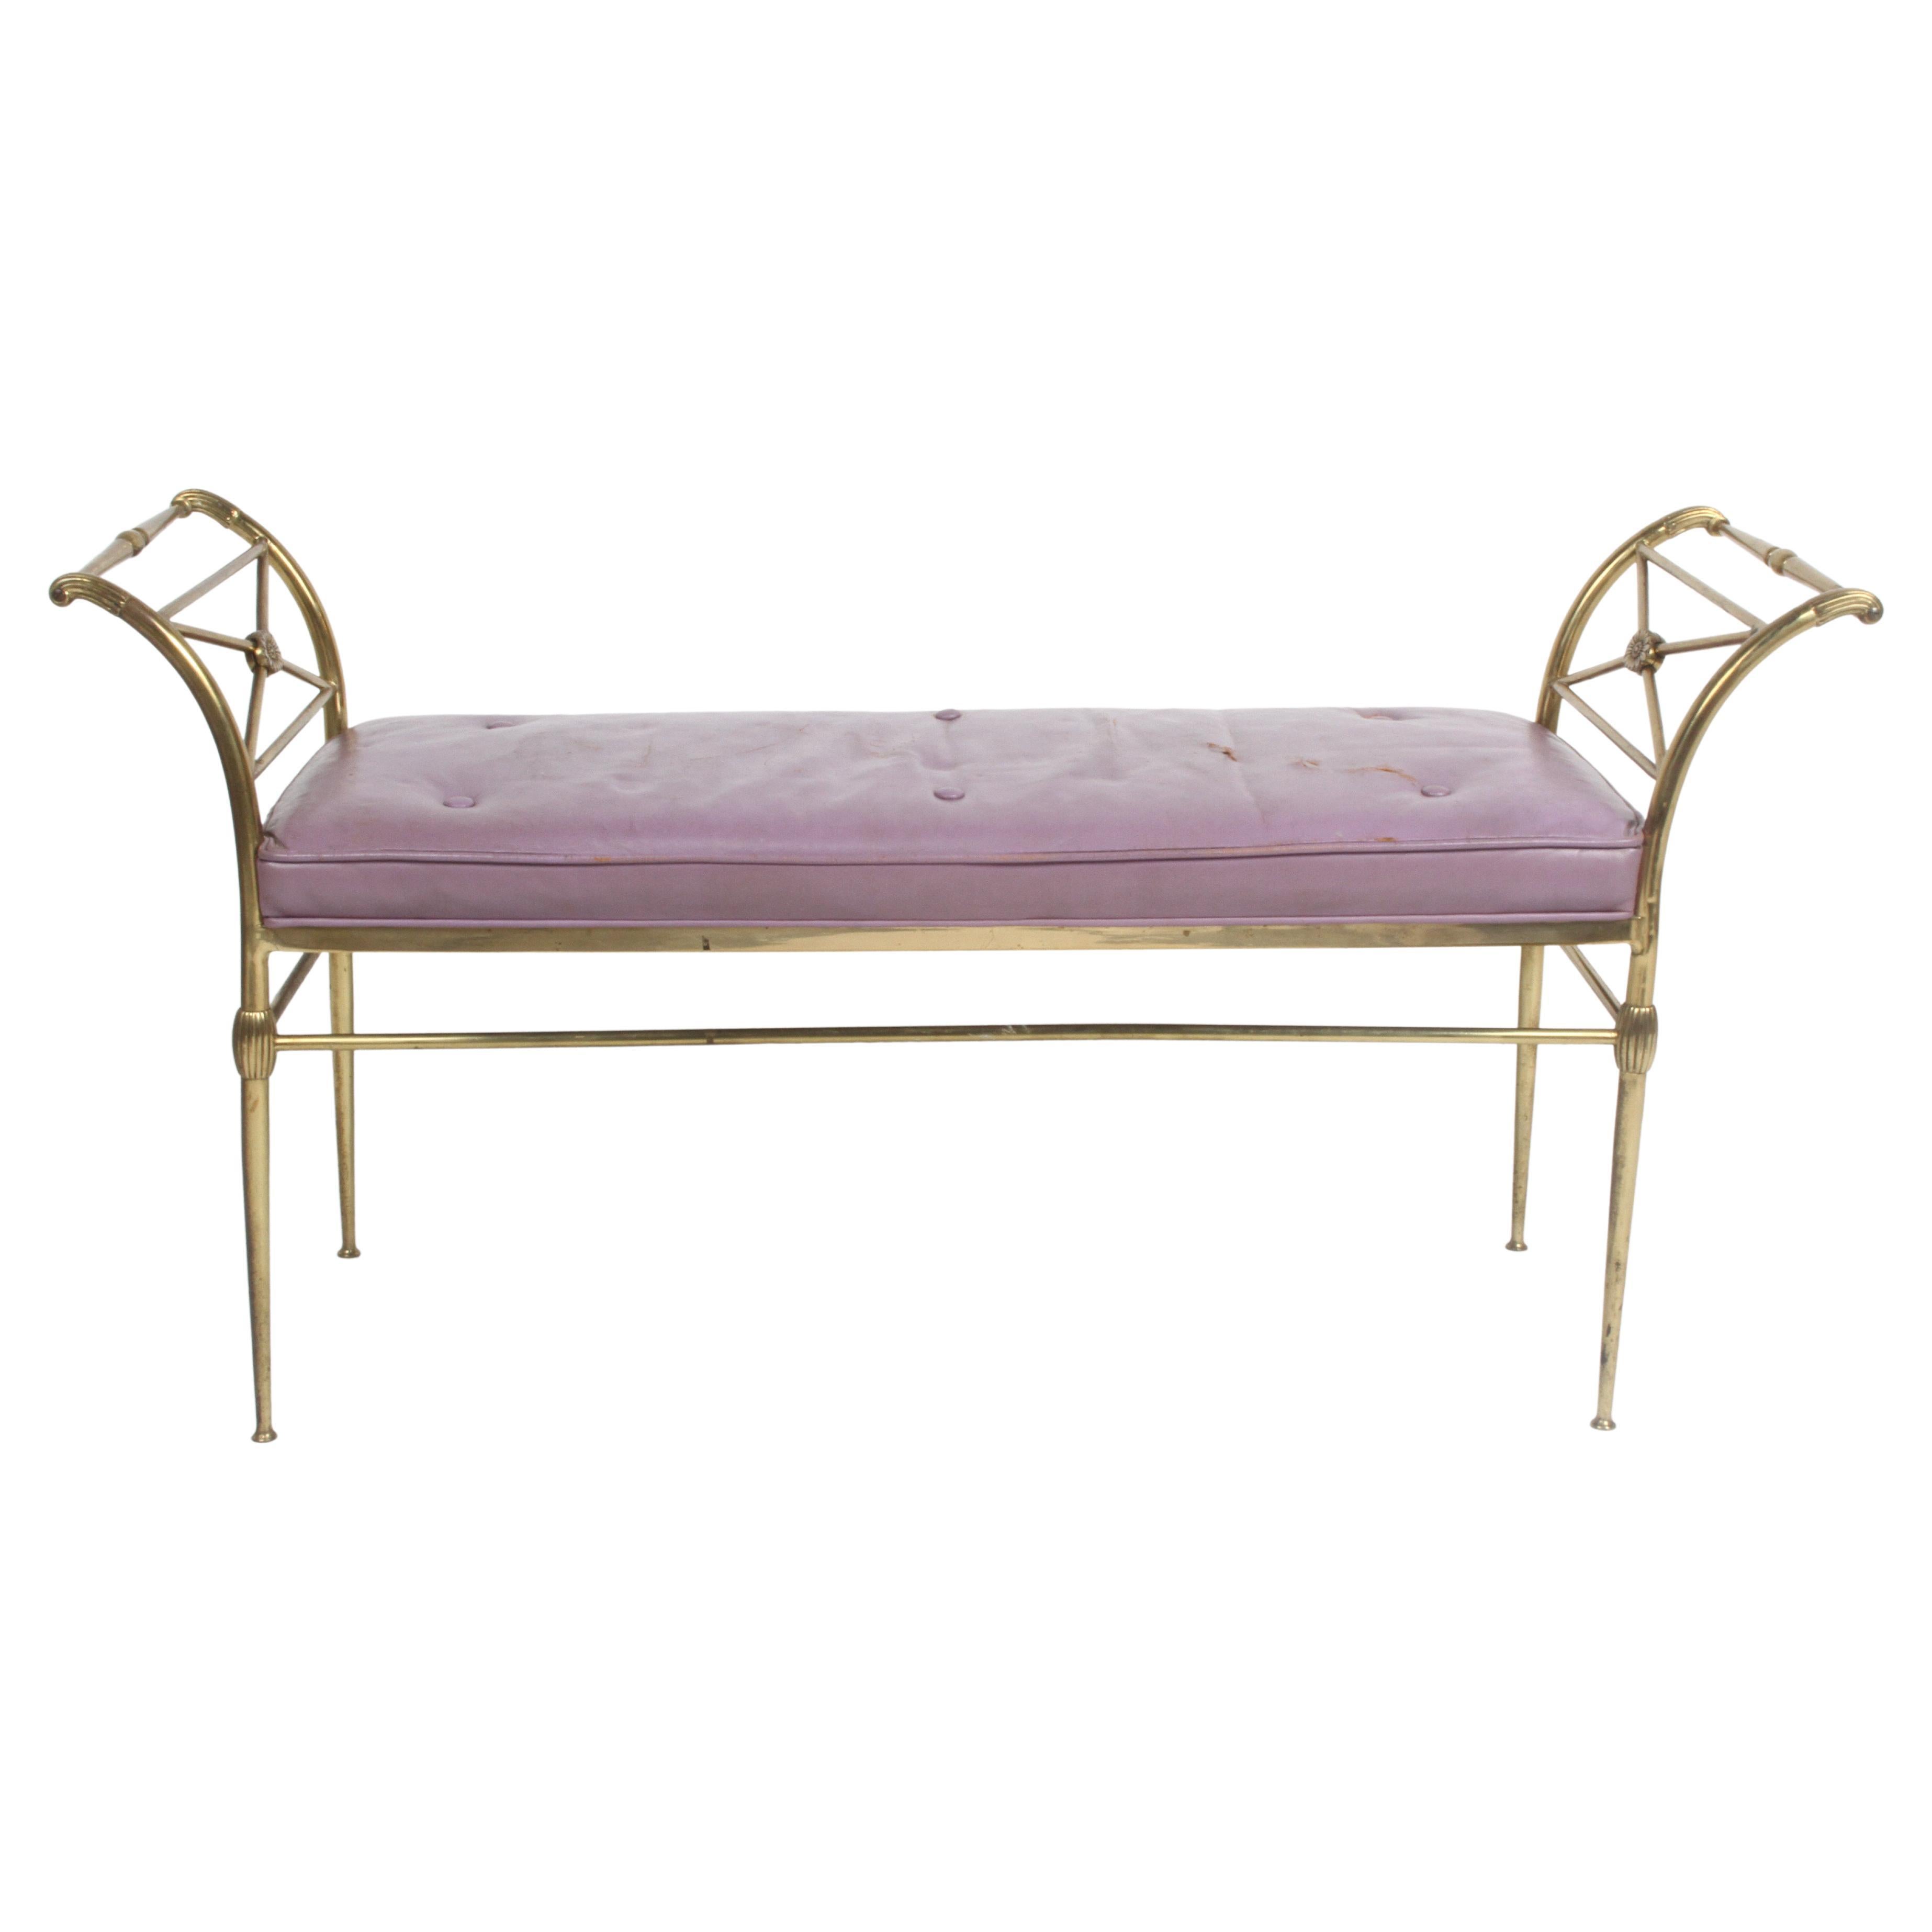 Hollywood Regency Italian Brass Bench with Arms on Tapered Legs Violet Leather